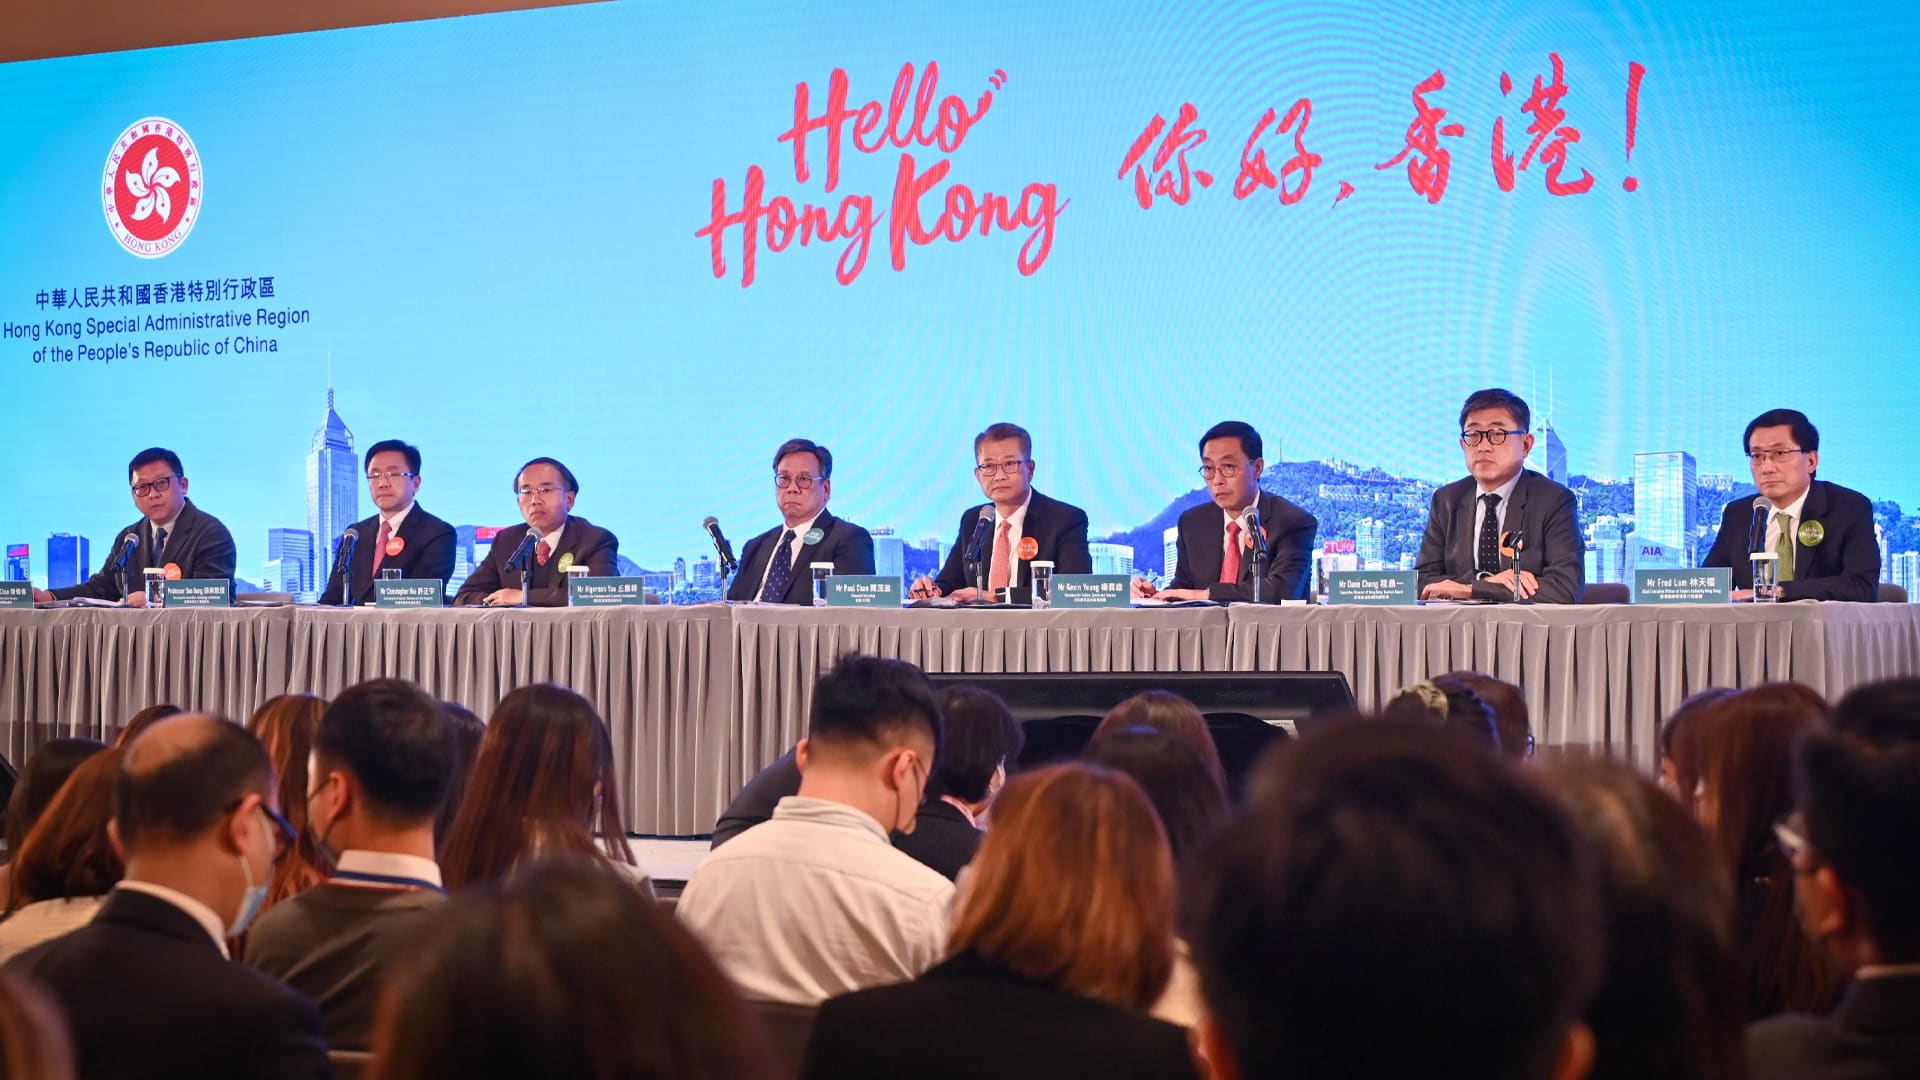 Hong Kong Sends its Biggest Welcome to the World: "Hello Hong Kong" Launched Today with 500,000 Free Air Tickets and City-Wide Offers